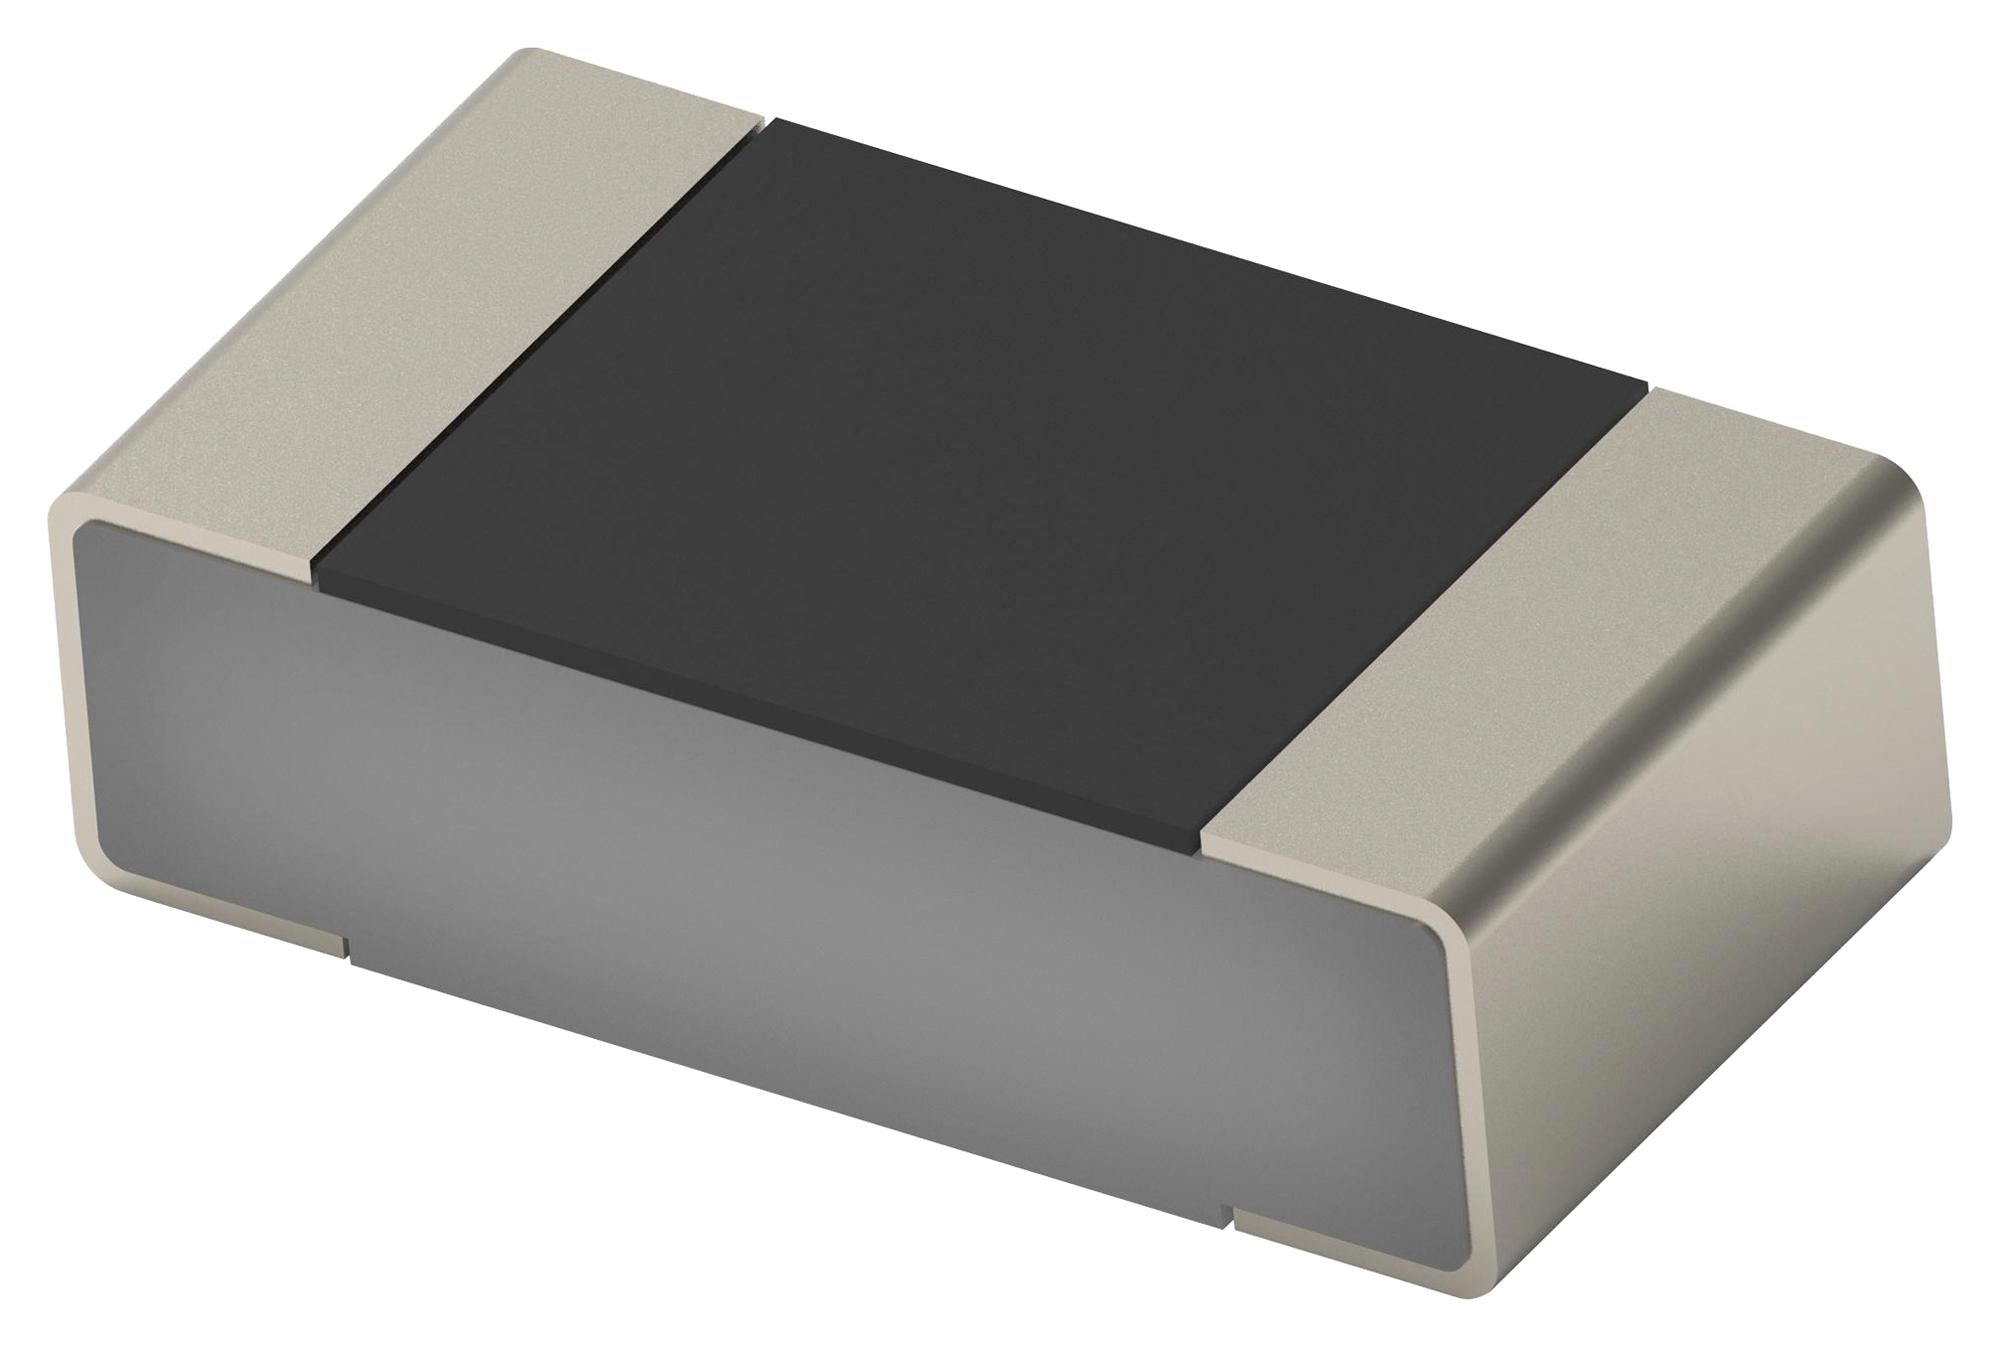 TLRP2B10WR020FTD RES, 0R02, 1W, 1206, METAL STRIP CGS - TE CONNECTIVITY